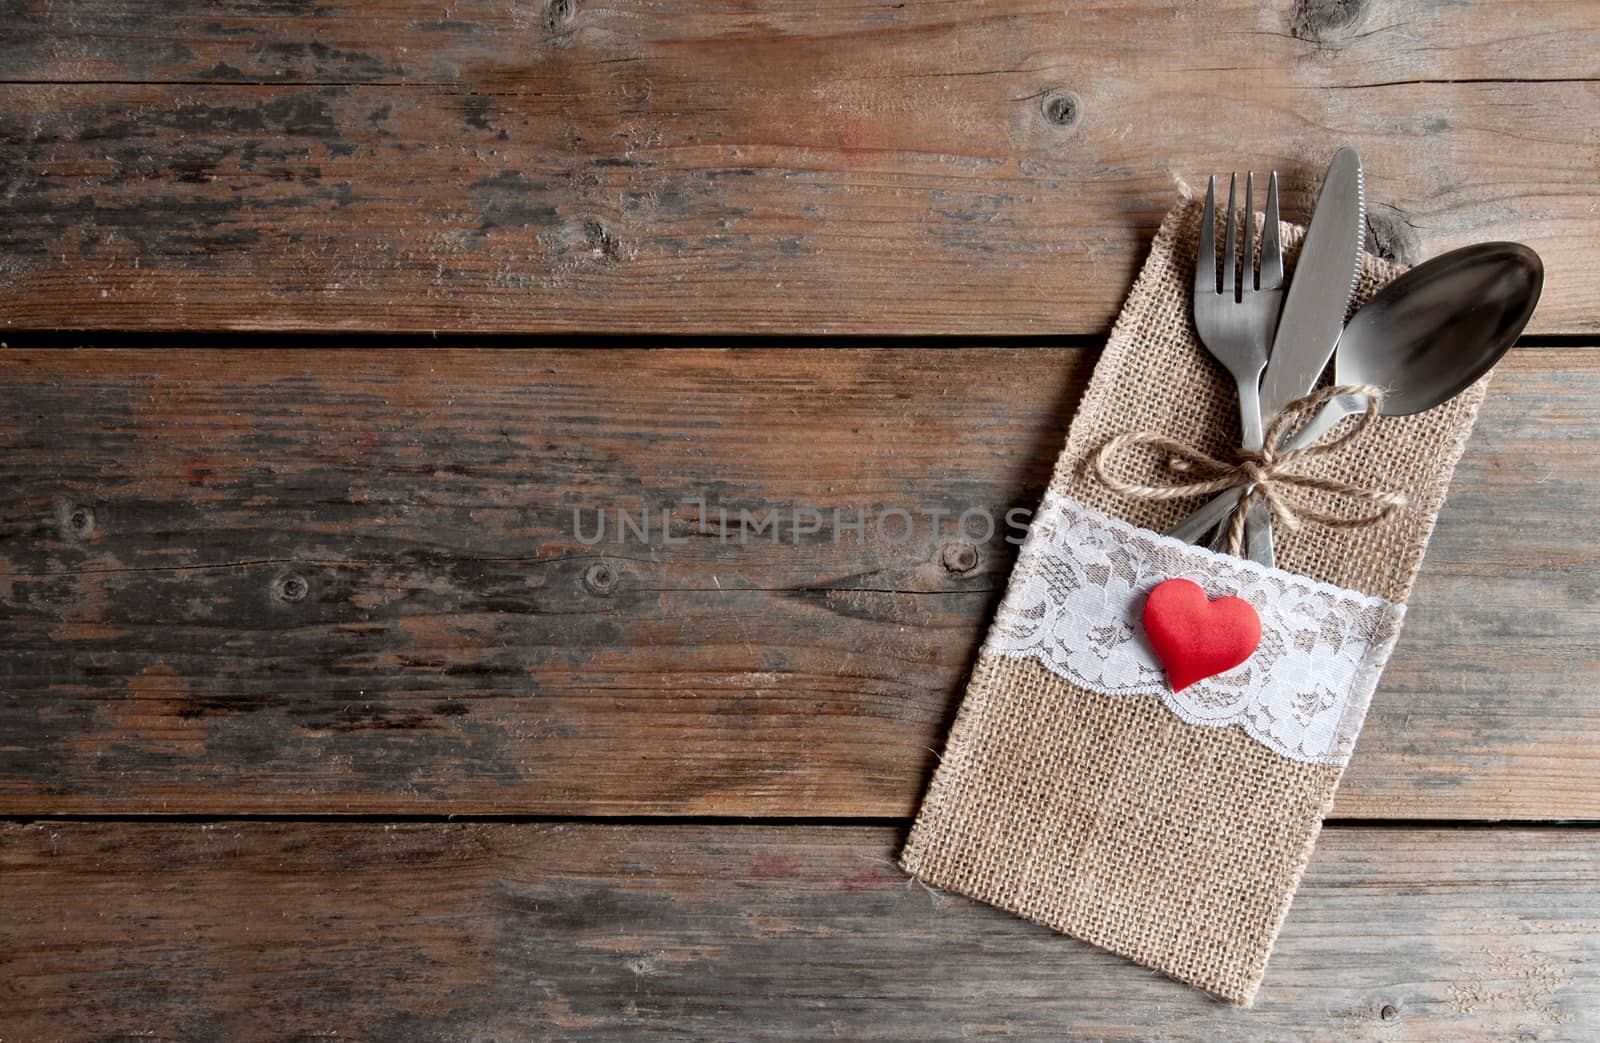 Romantic meal valentines day background by unikpix